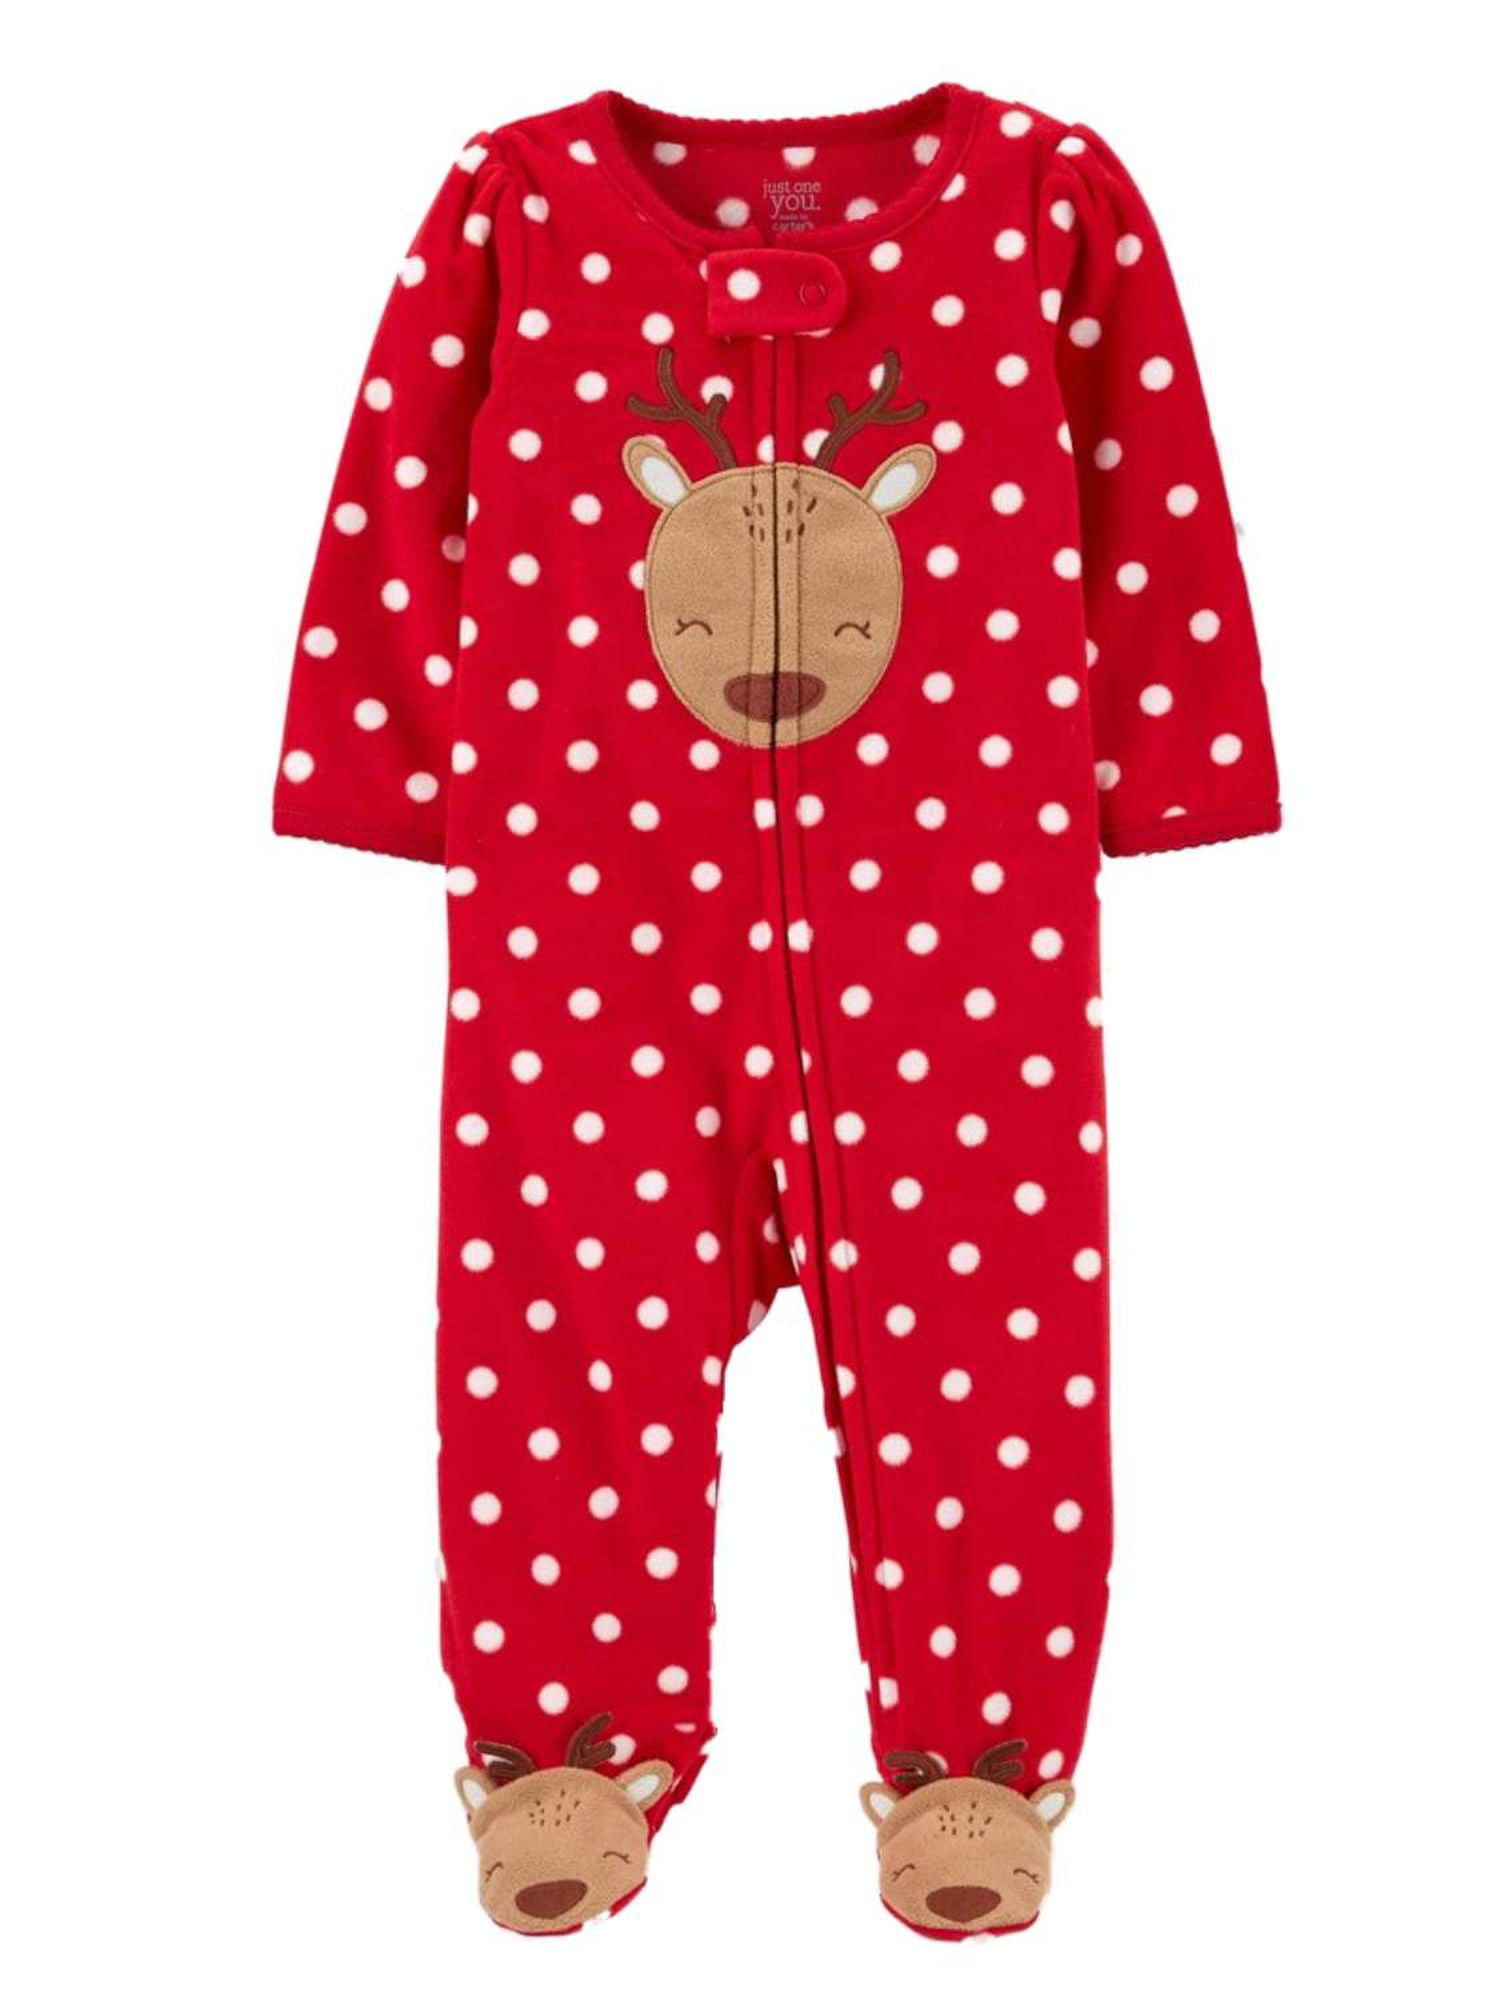 NEW REINDEER Pajama Baby One Pc Size 3-6 Month White Red Fleece Infant Foot PJ 